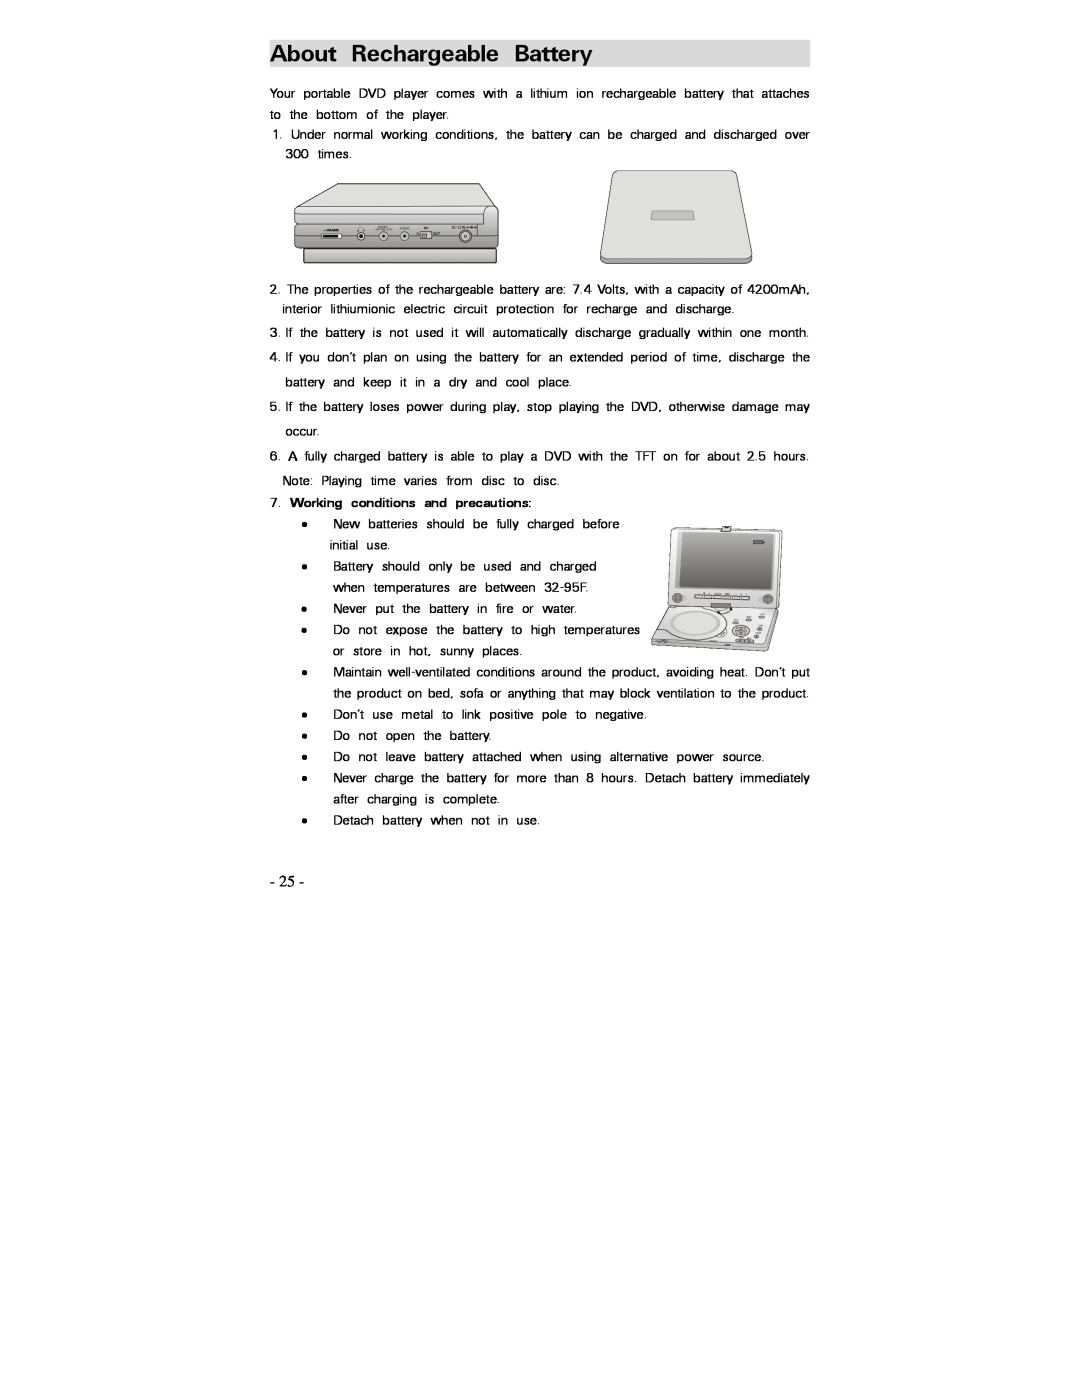 Polaroid PDV-0750 operation manual About Rechargeable Battery, Working conditions and precautions 